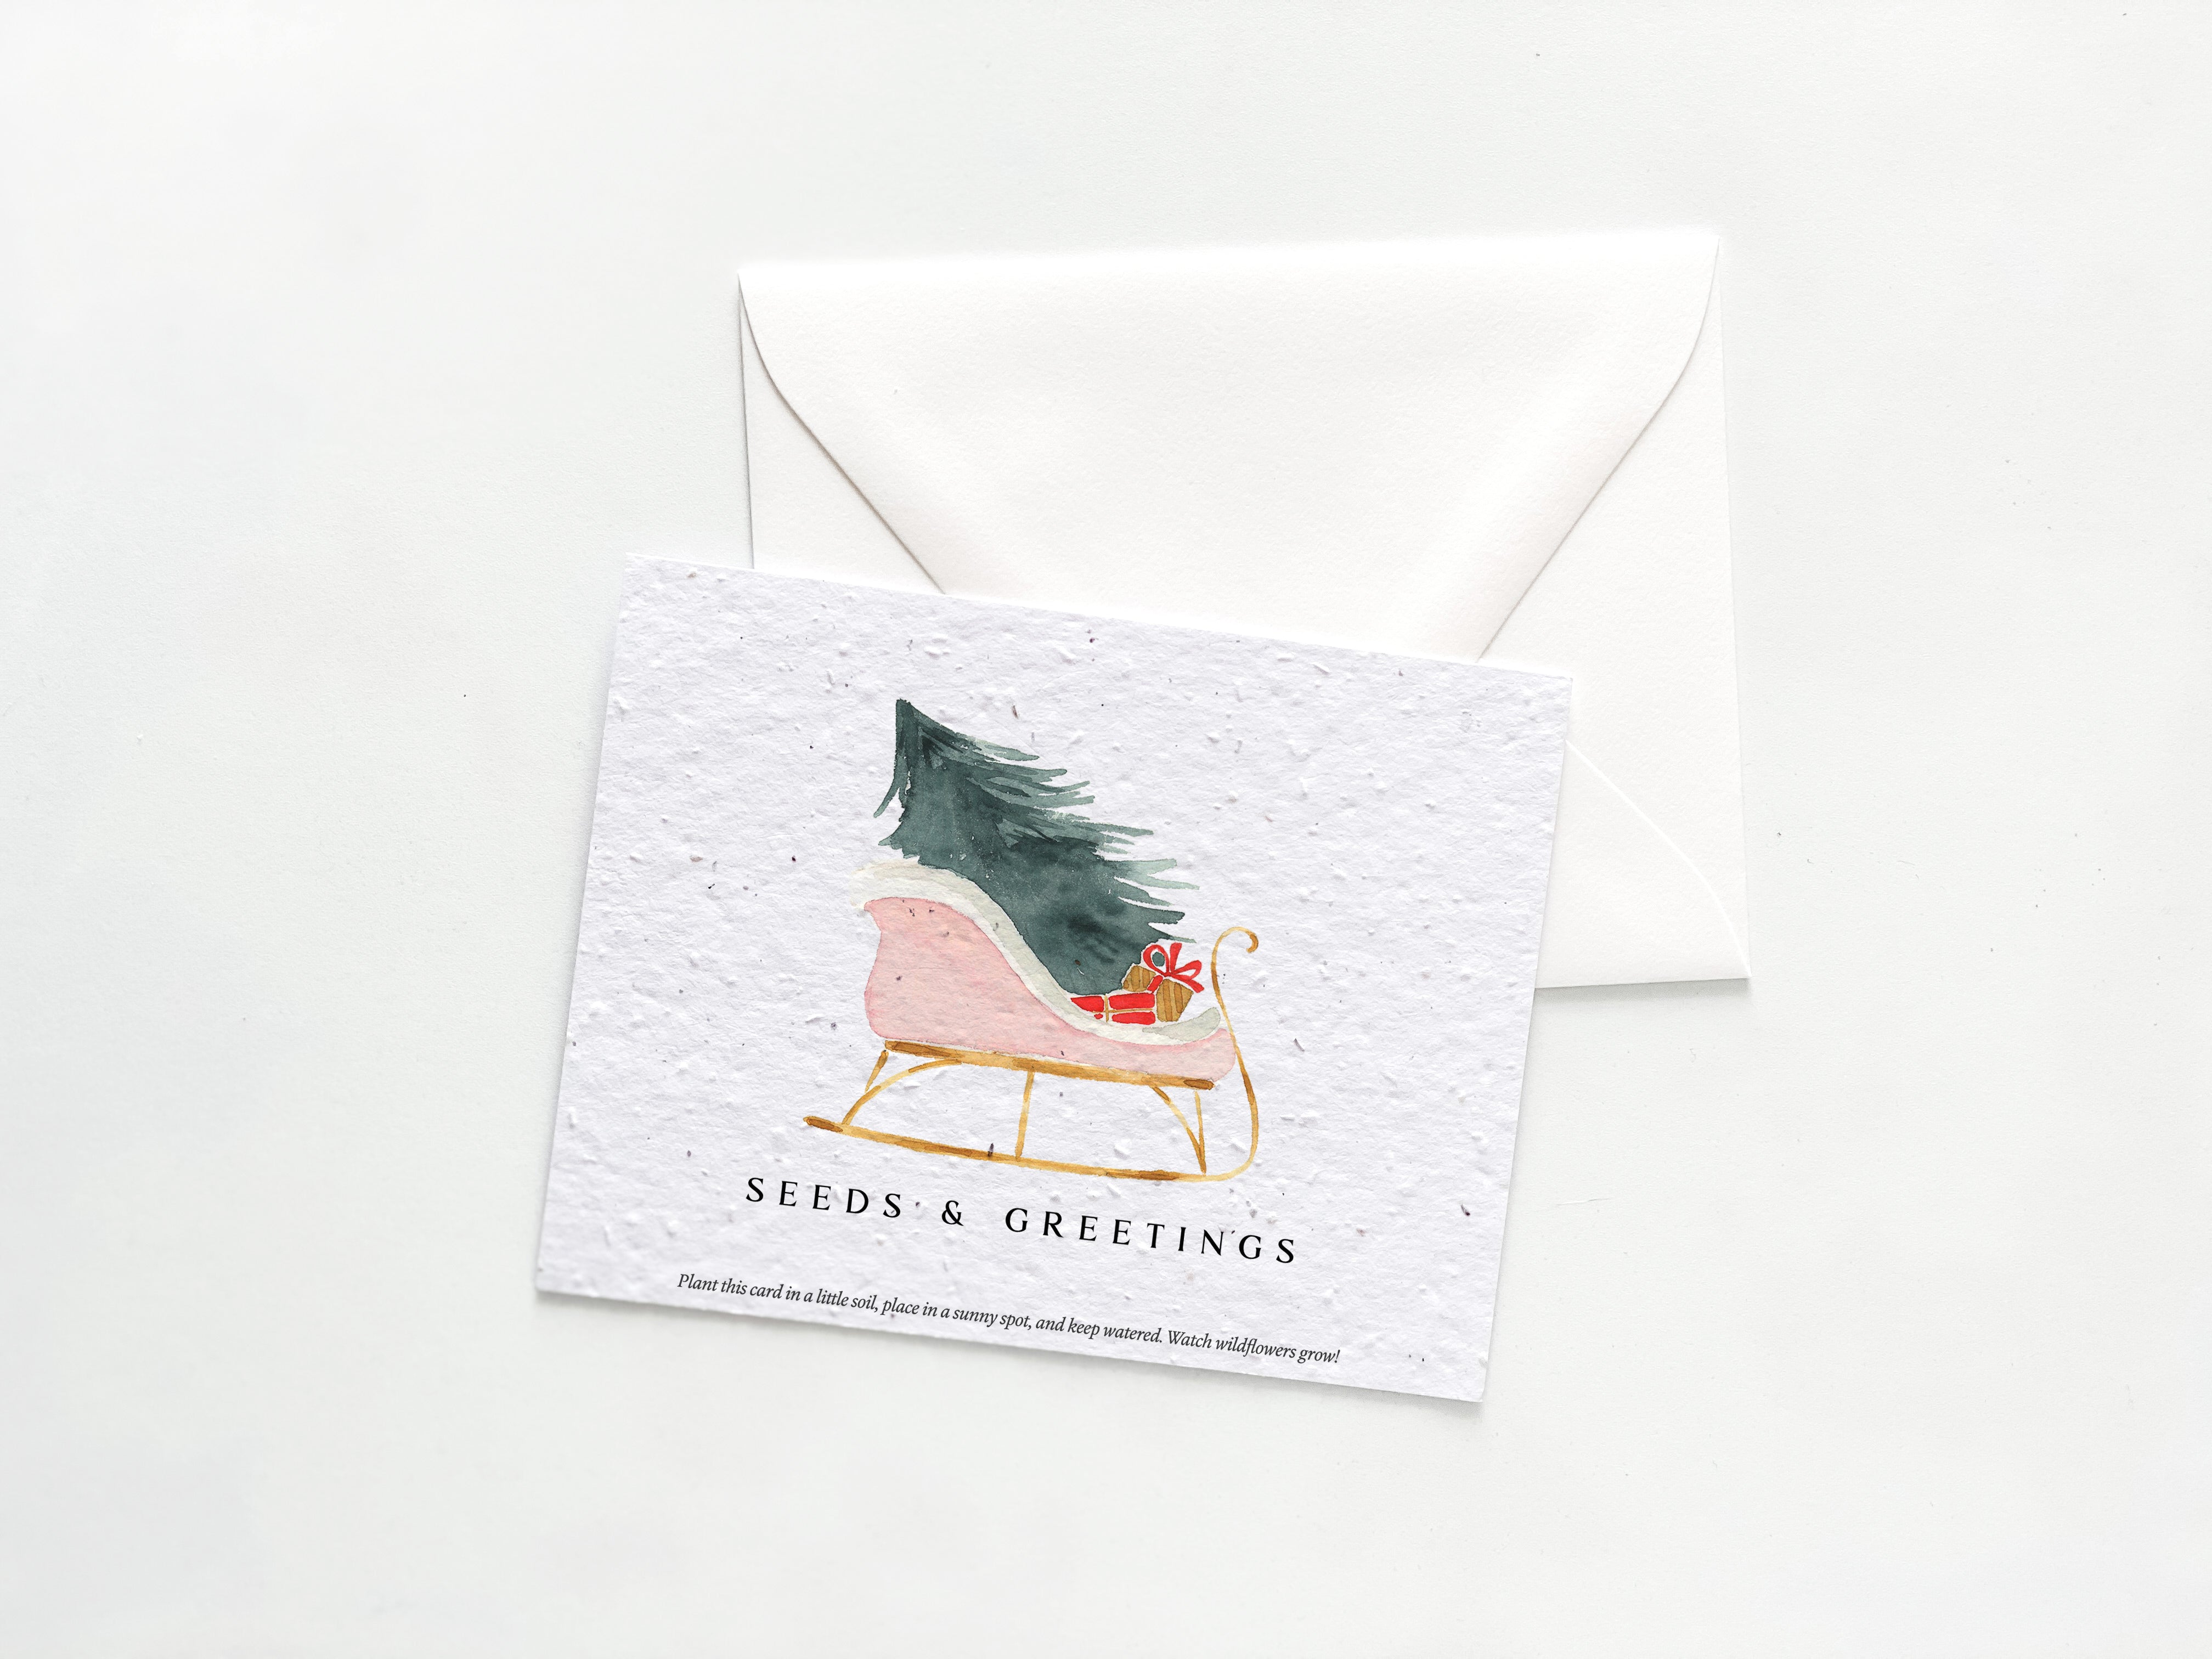 growNOTES™ Holiday Greeting Cards on Plantable Seed Paper - Seeds & Greetings Sleigh